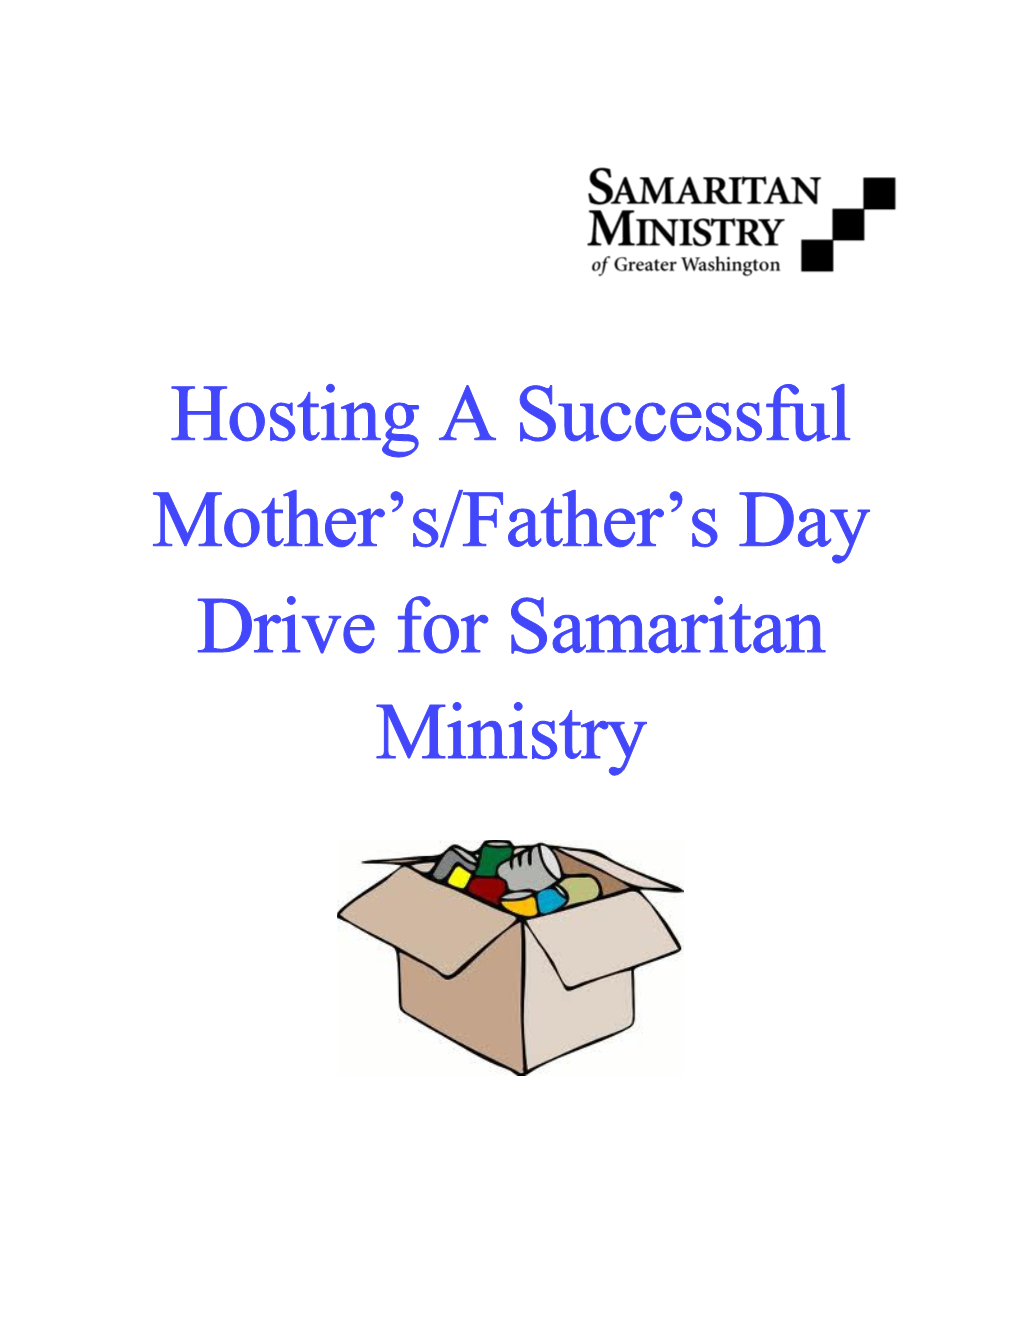 Hosting a Successful Mother S/Father S Day Drive for Samaritan Ministry